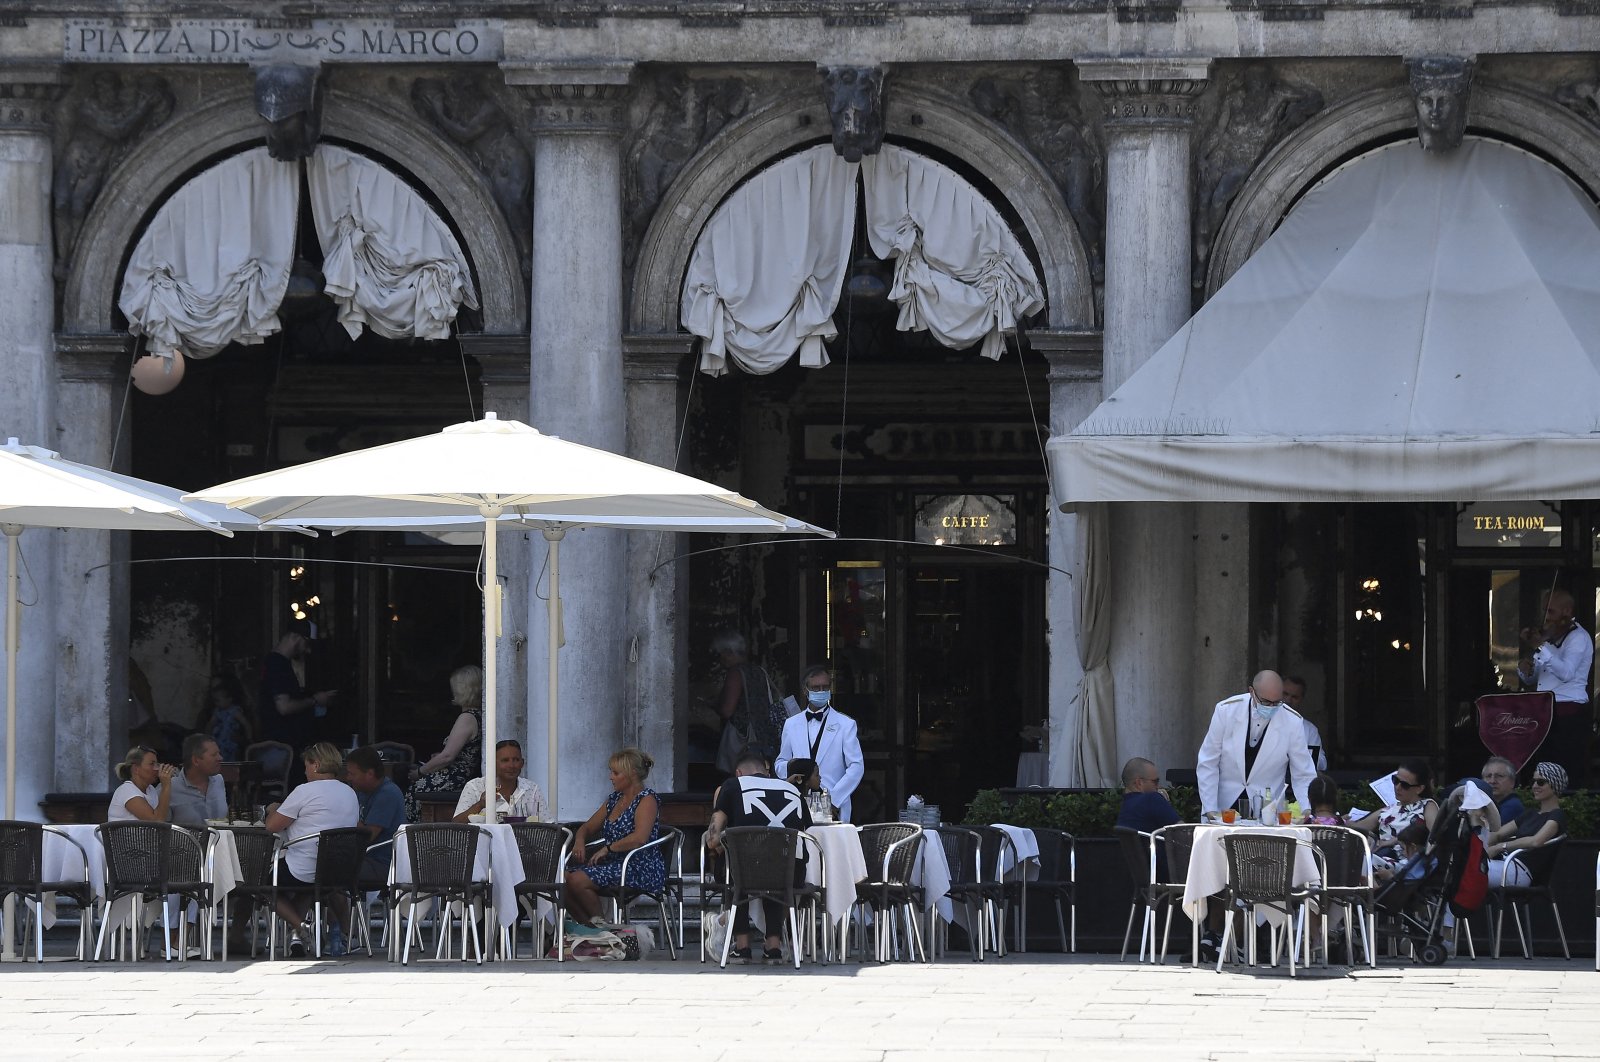 The first umbrellas were mounted that will cover the spaces in front of the premises, enlarged to facilitate the safe arrangement of the tables according to the safety rules on coronavirus, at San Marco square in Venice, Italy, on June 27, 2020. (Reuters Photo)